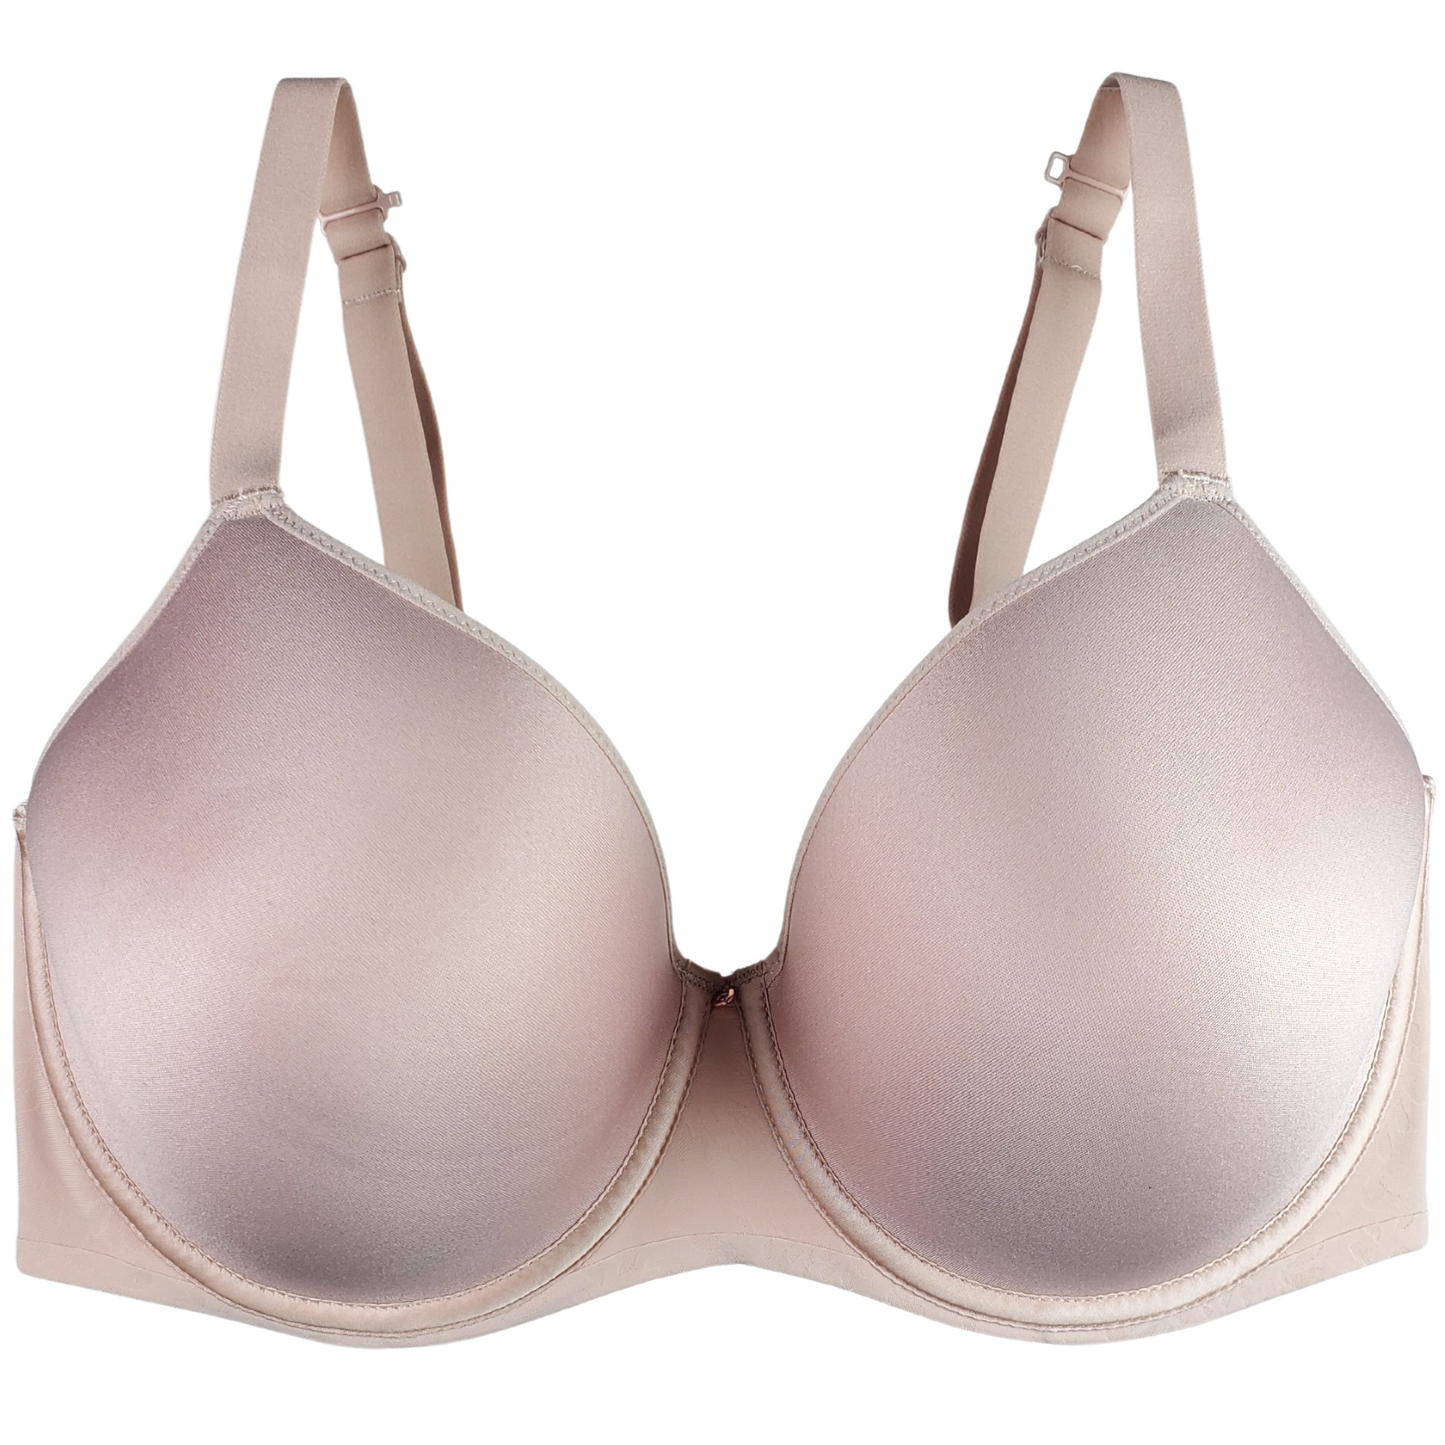 Full Busted Figure Types in 32FF Bra Size White Convertible, J